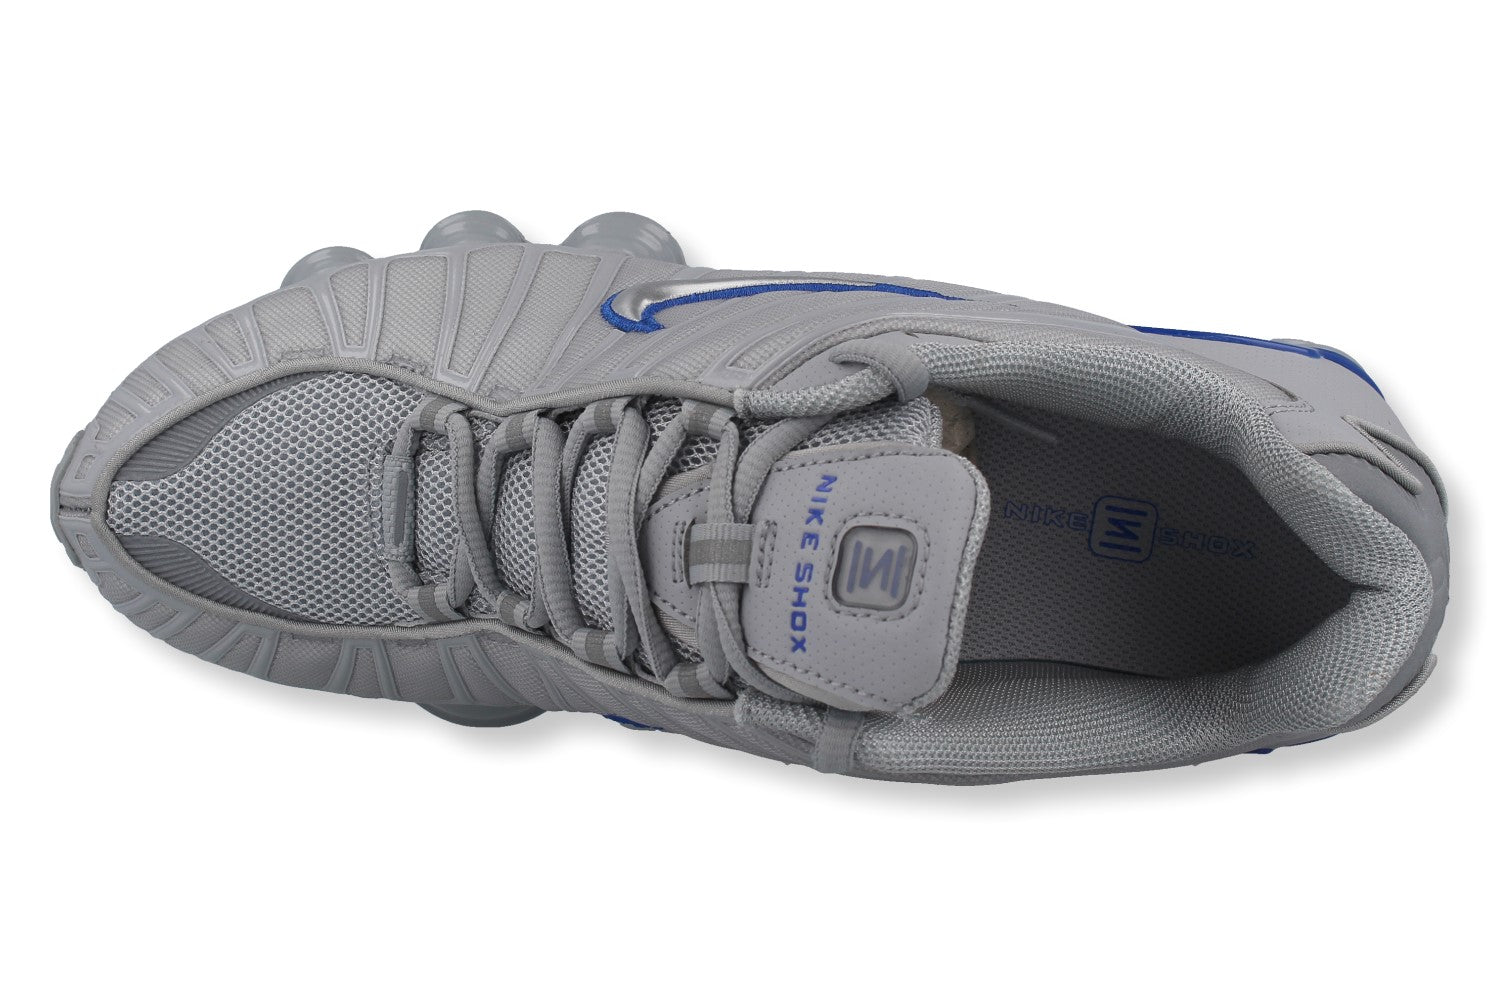 Zapatillas Nike Shox Tl3 Online Cheapest, 52% OFF fames.org.br